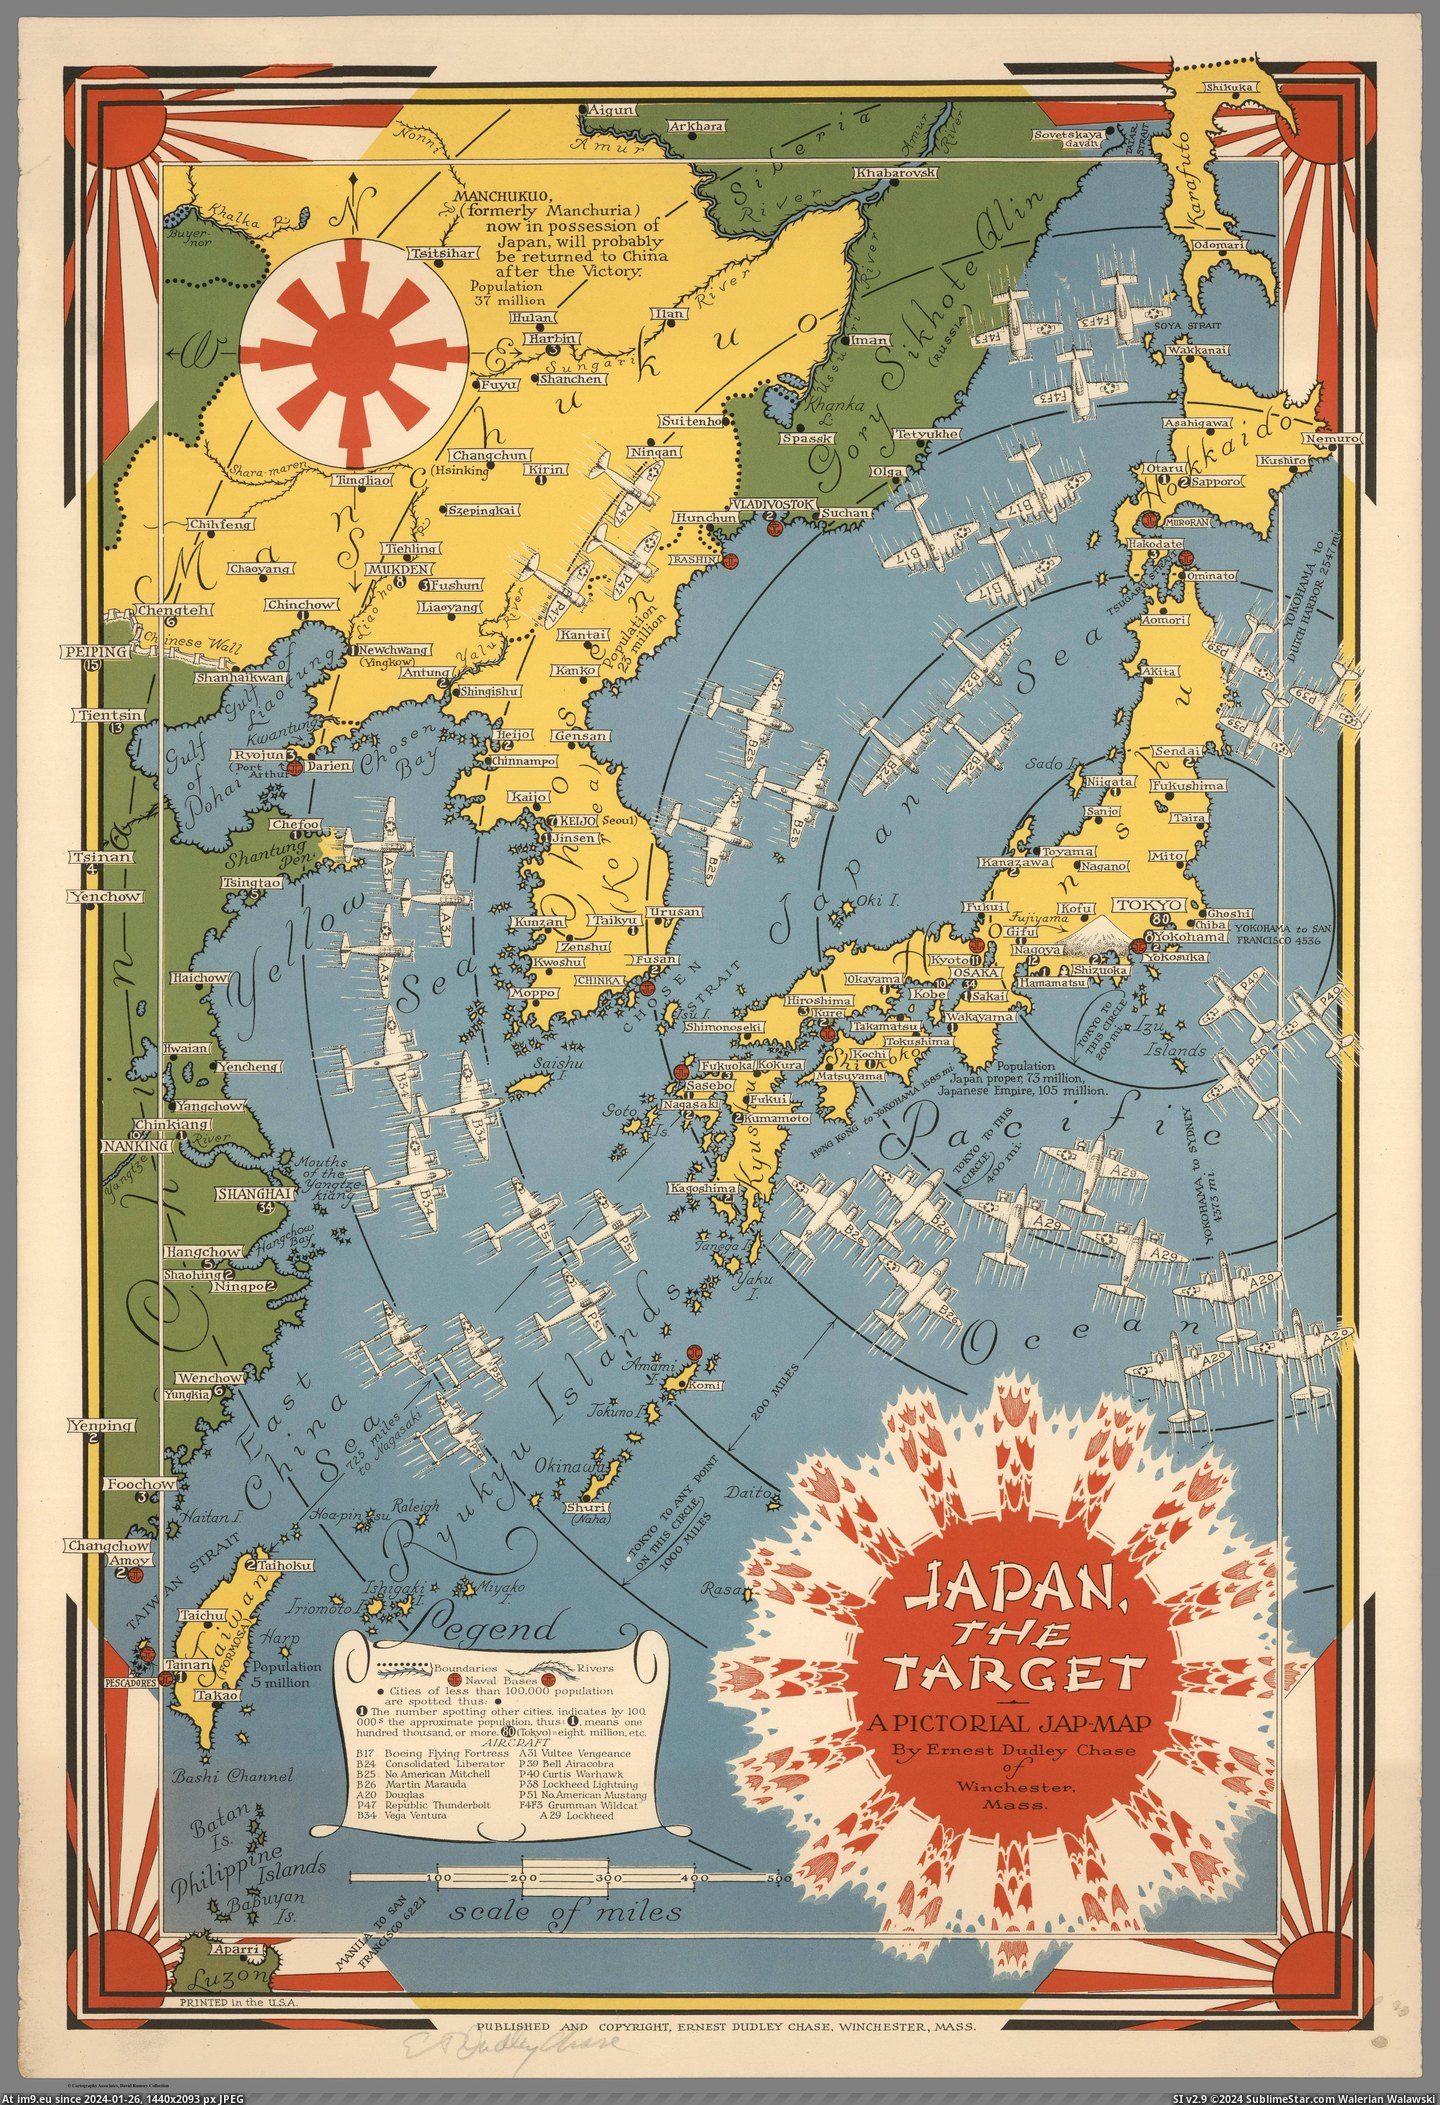 #Map #Japan #Ernest #Pictorial #Dudley #Target #Chase [Mapporn] Japan the Target, a pictorial map made by Ernest Dudley Chase, 1942 [4003x5830] Pic. (Image of album My r/MAPS favs))